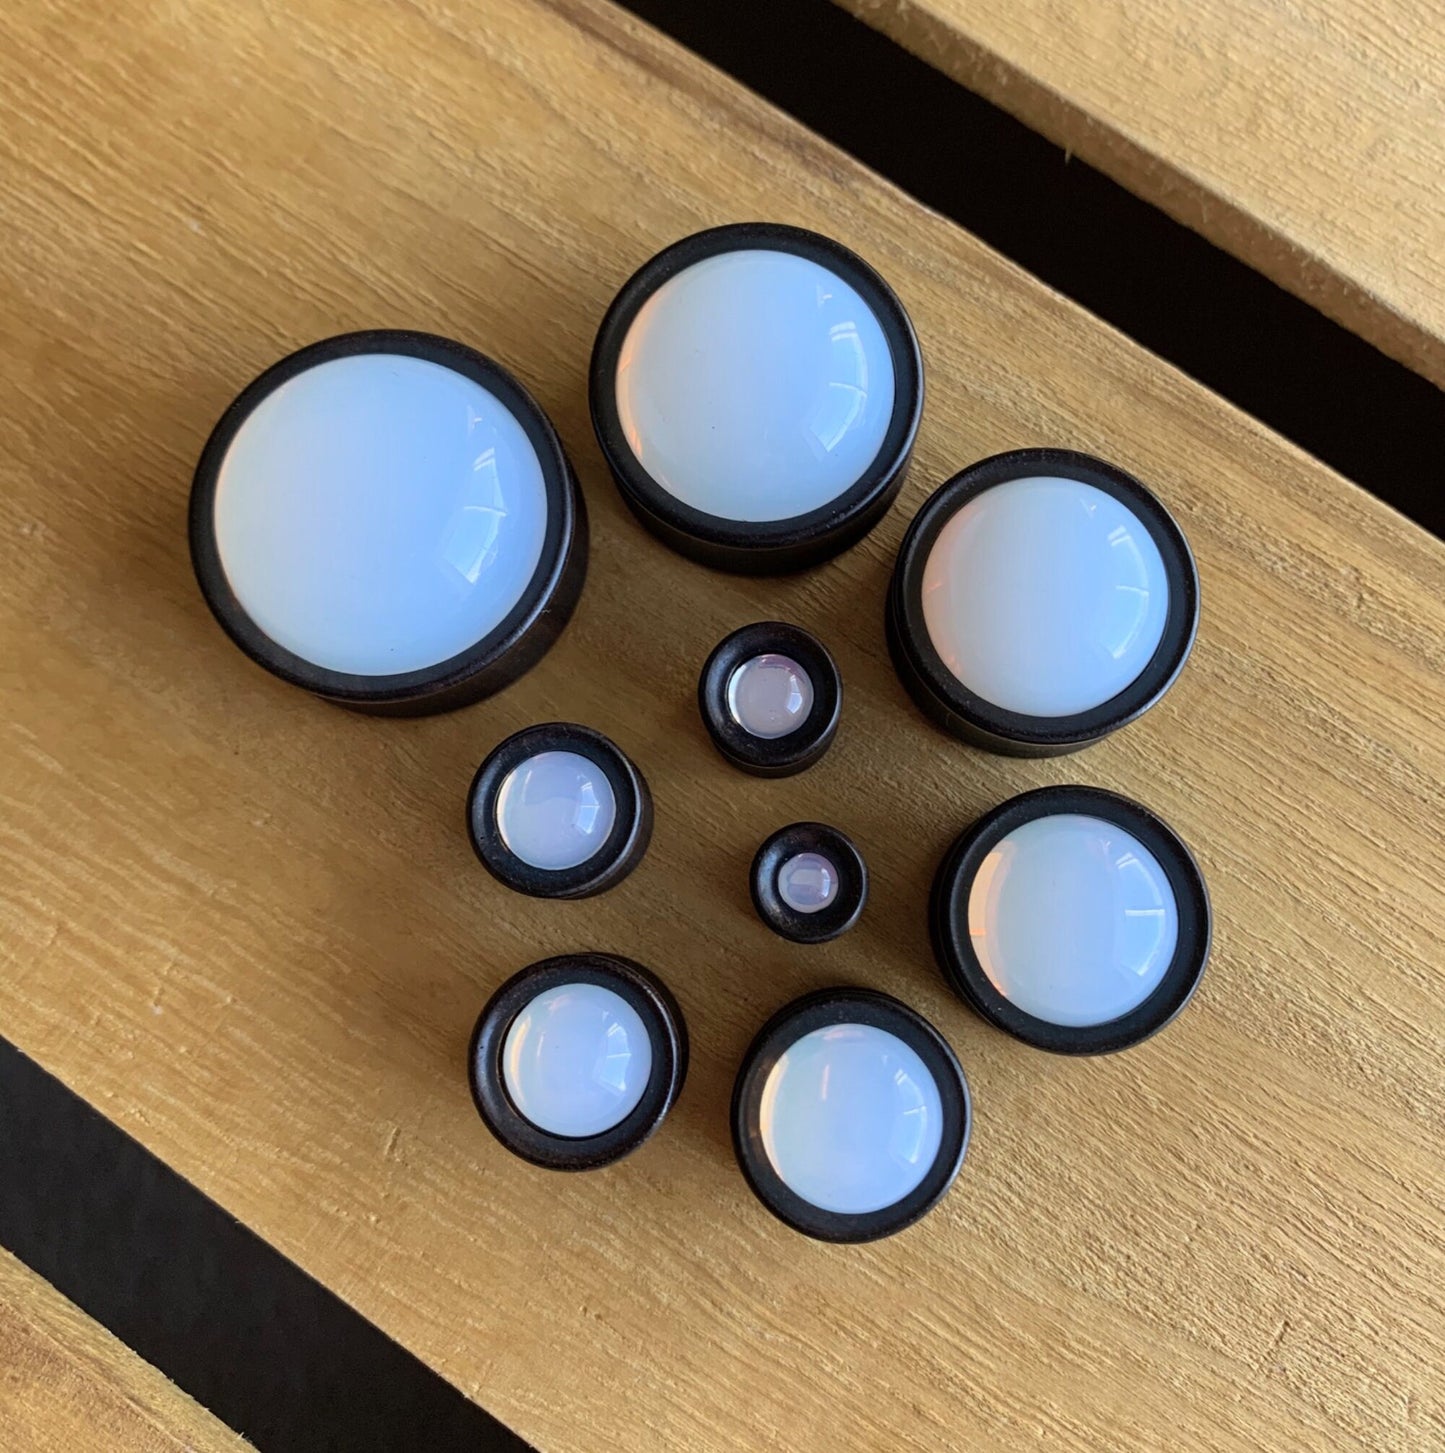 PAIR of Beautiful Opalite Stone Dome Ebony Organic Wood Plugs - Gauges 2g (6mm) to 1" (25mm) available!